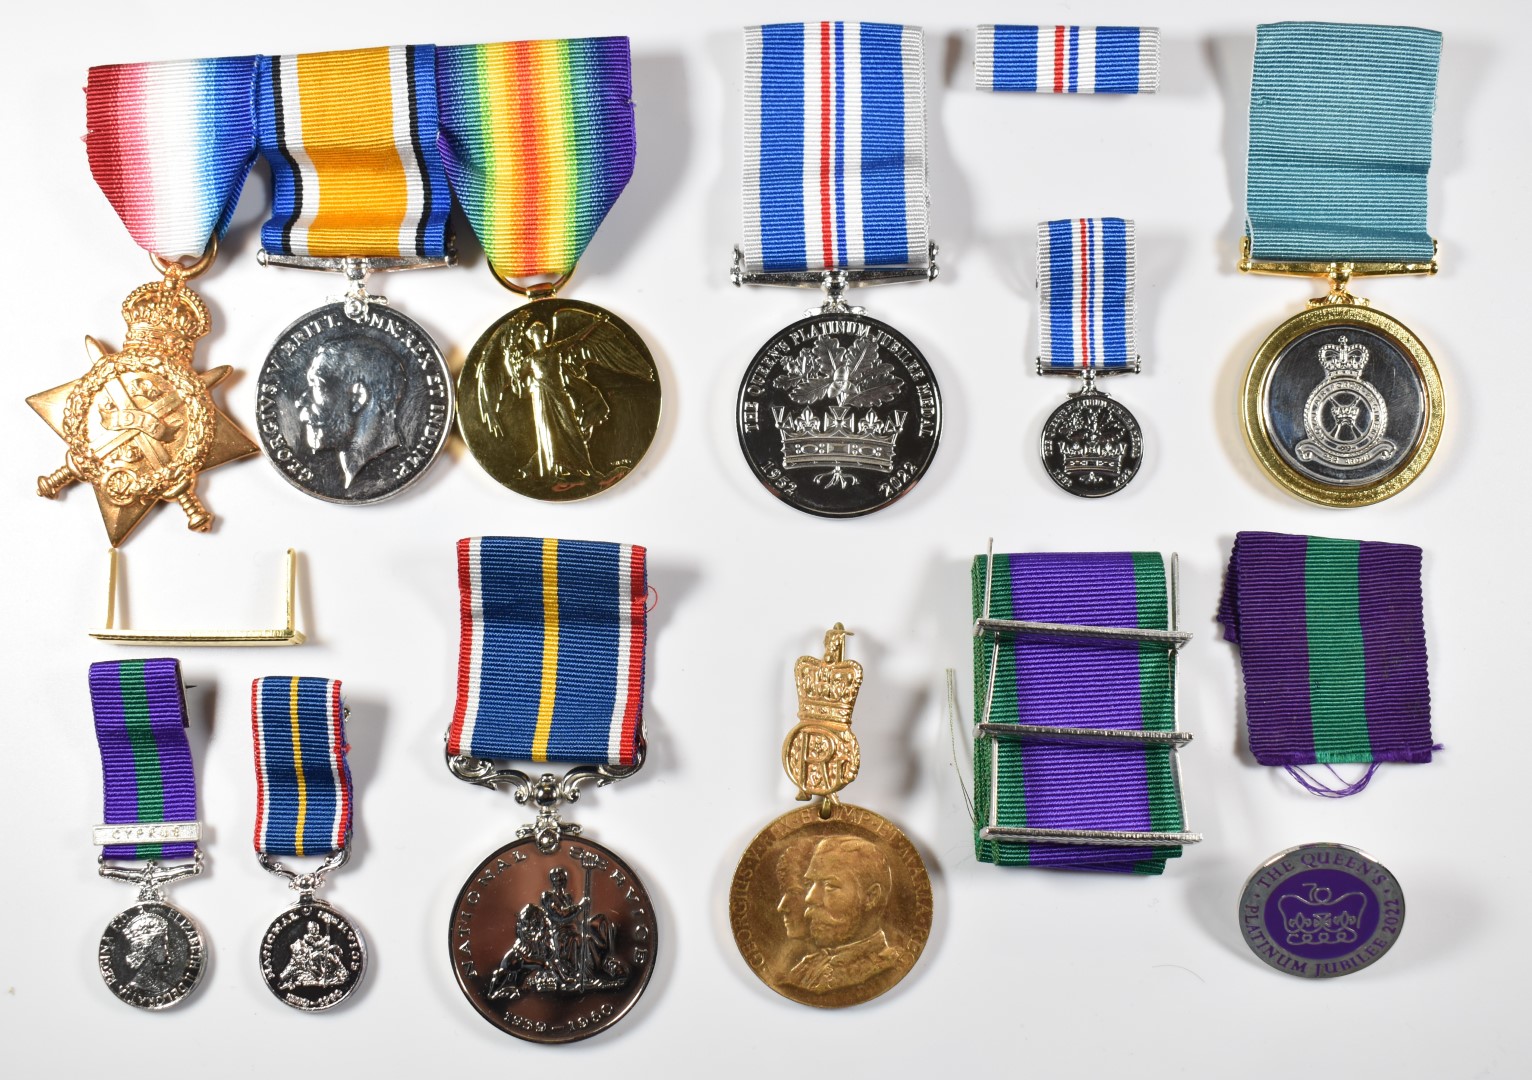 British Army WW1 replacement medals comprising 1914 Star, War Medal and Victory Medal, named to 1357